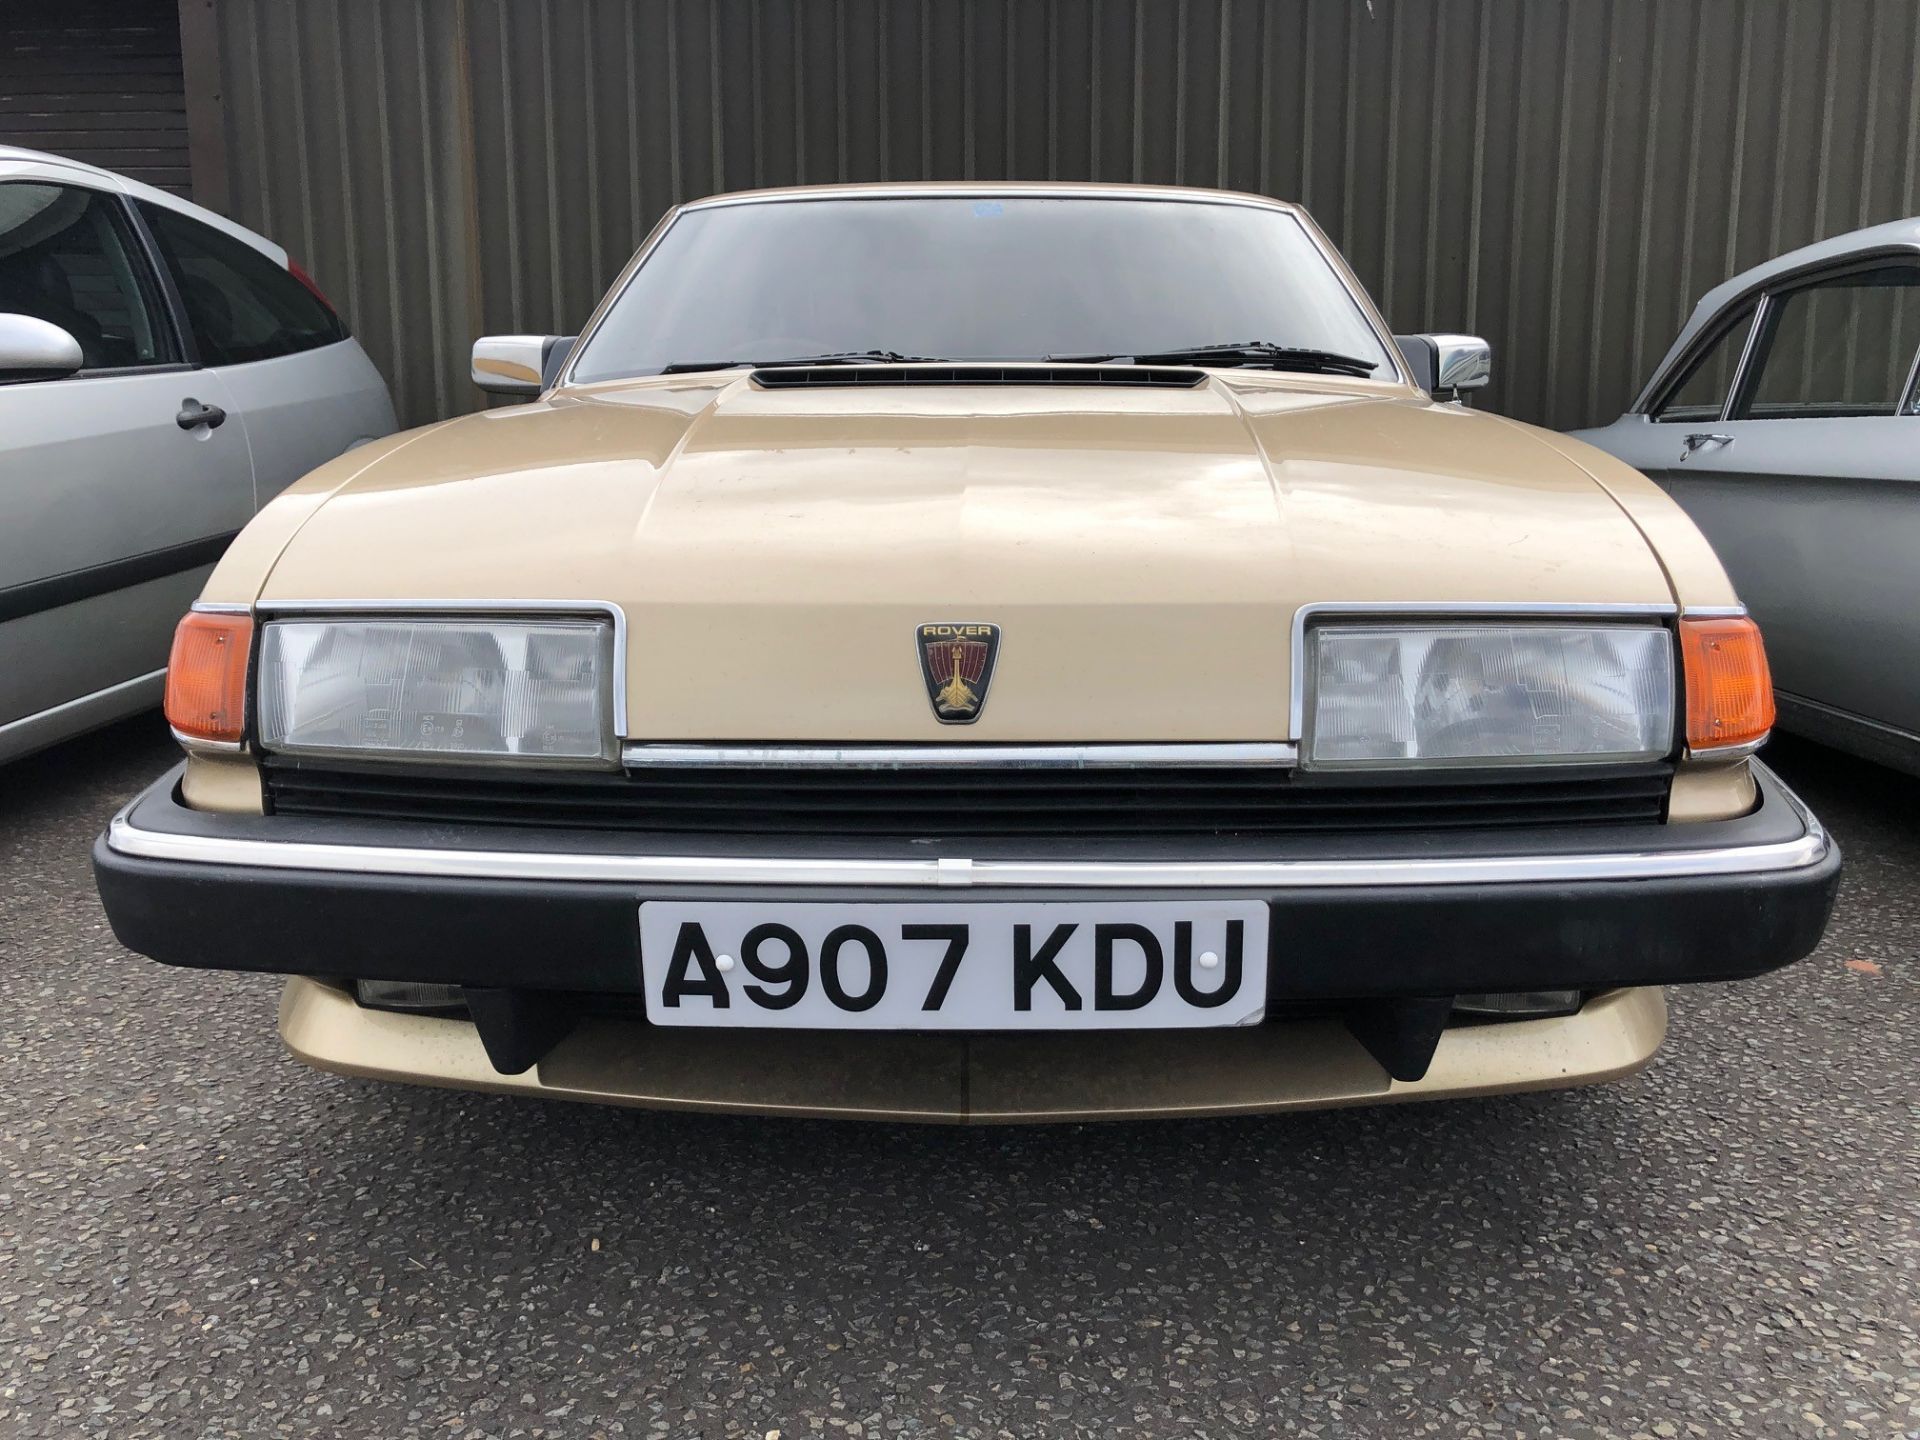 1984 Rover SD1 2300S Registration number A907 KDU Champagne Gold metallic Automatic Low miles - Image 3 of 14